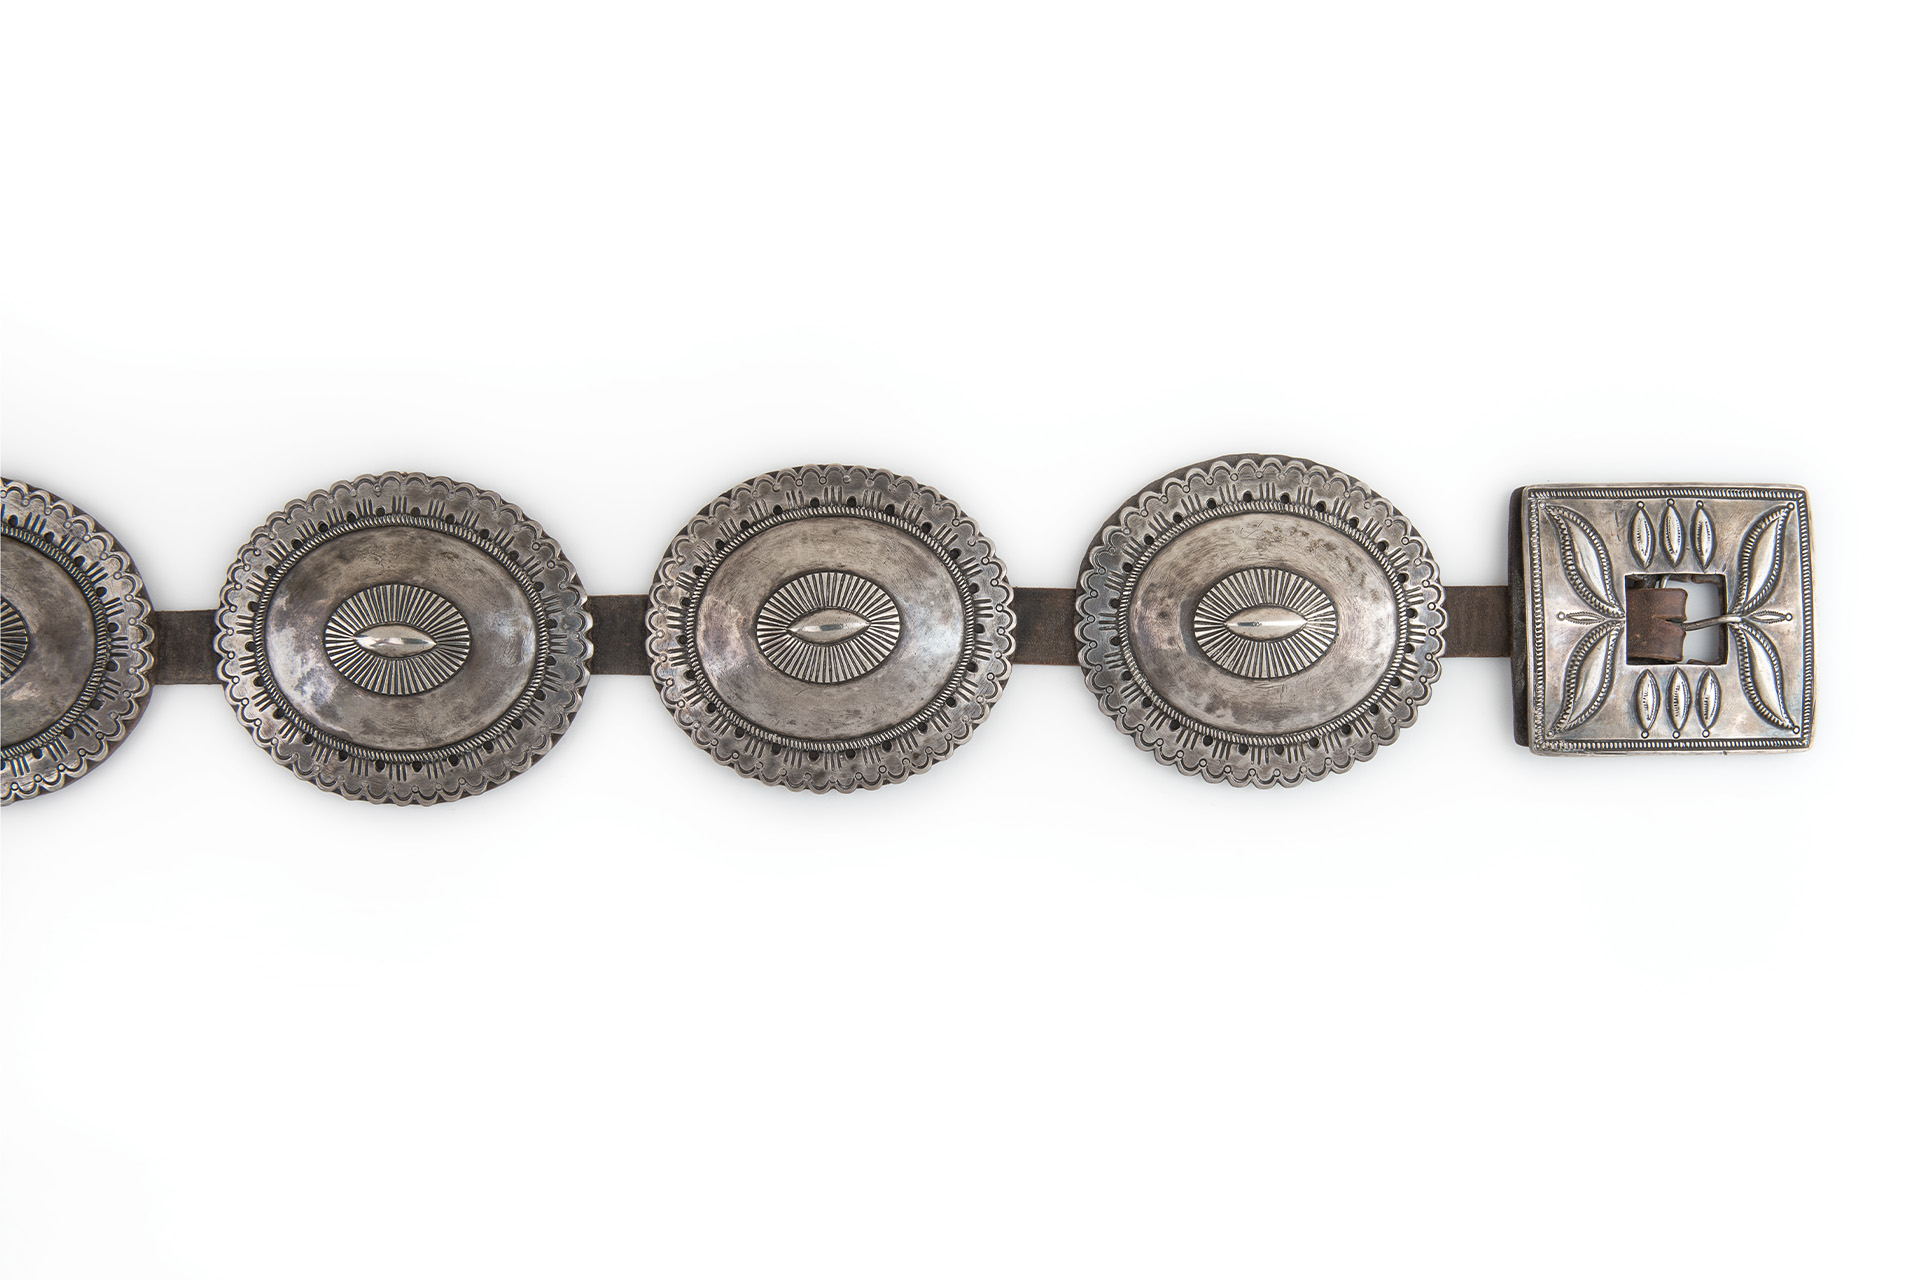 A silver belt with a large number of medallions on it.